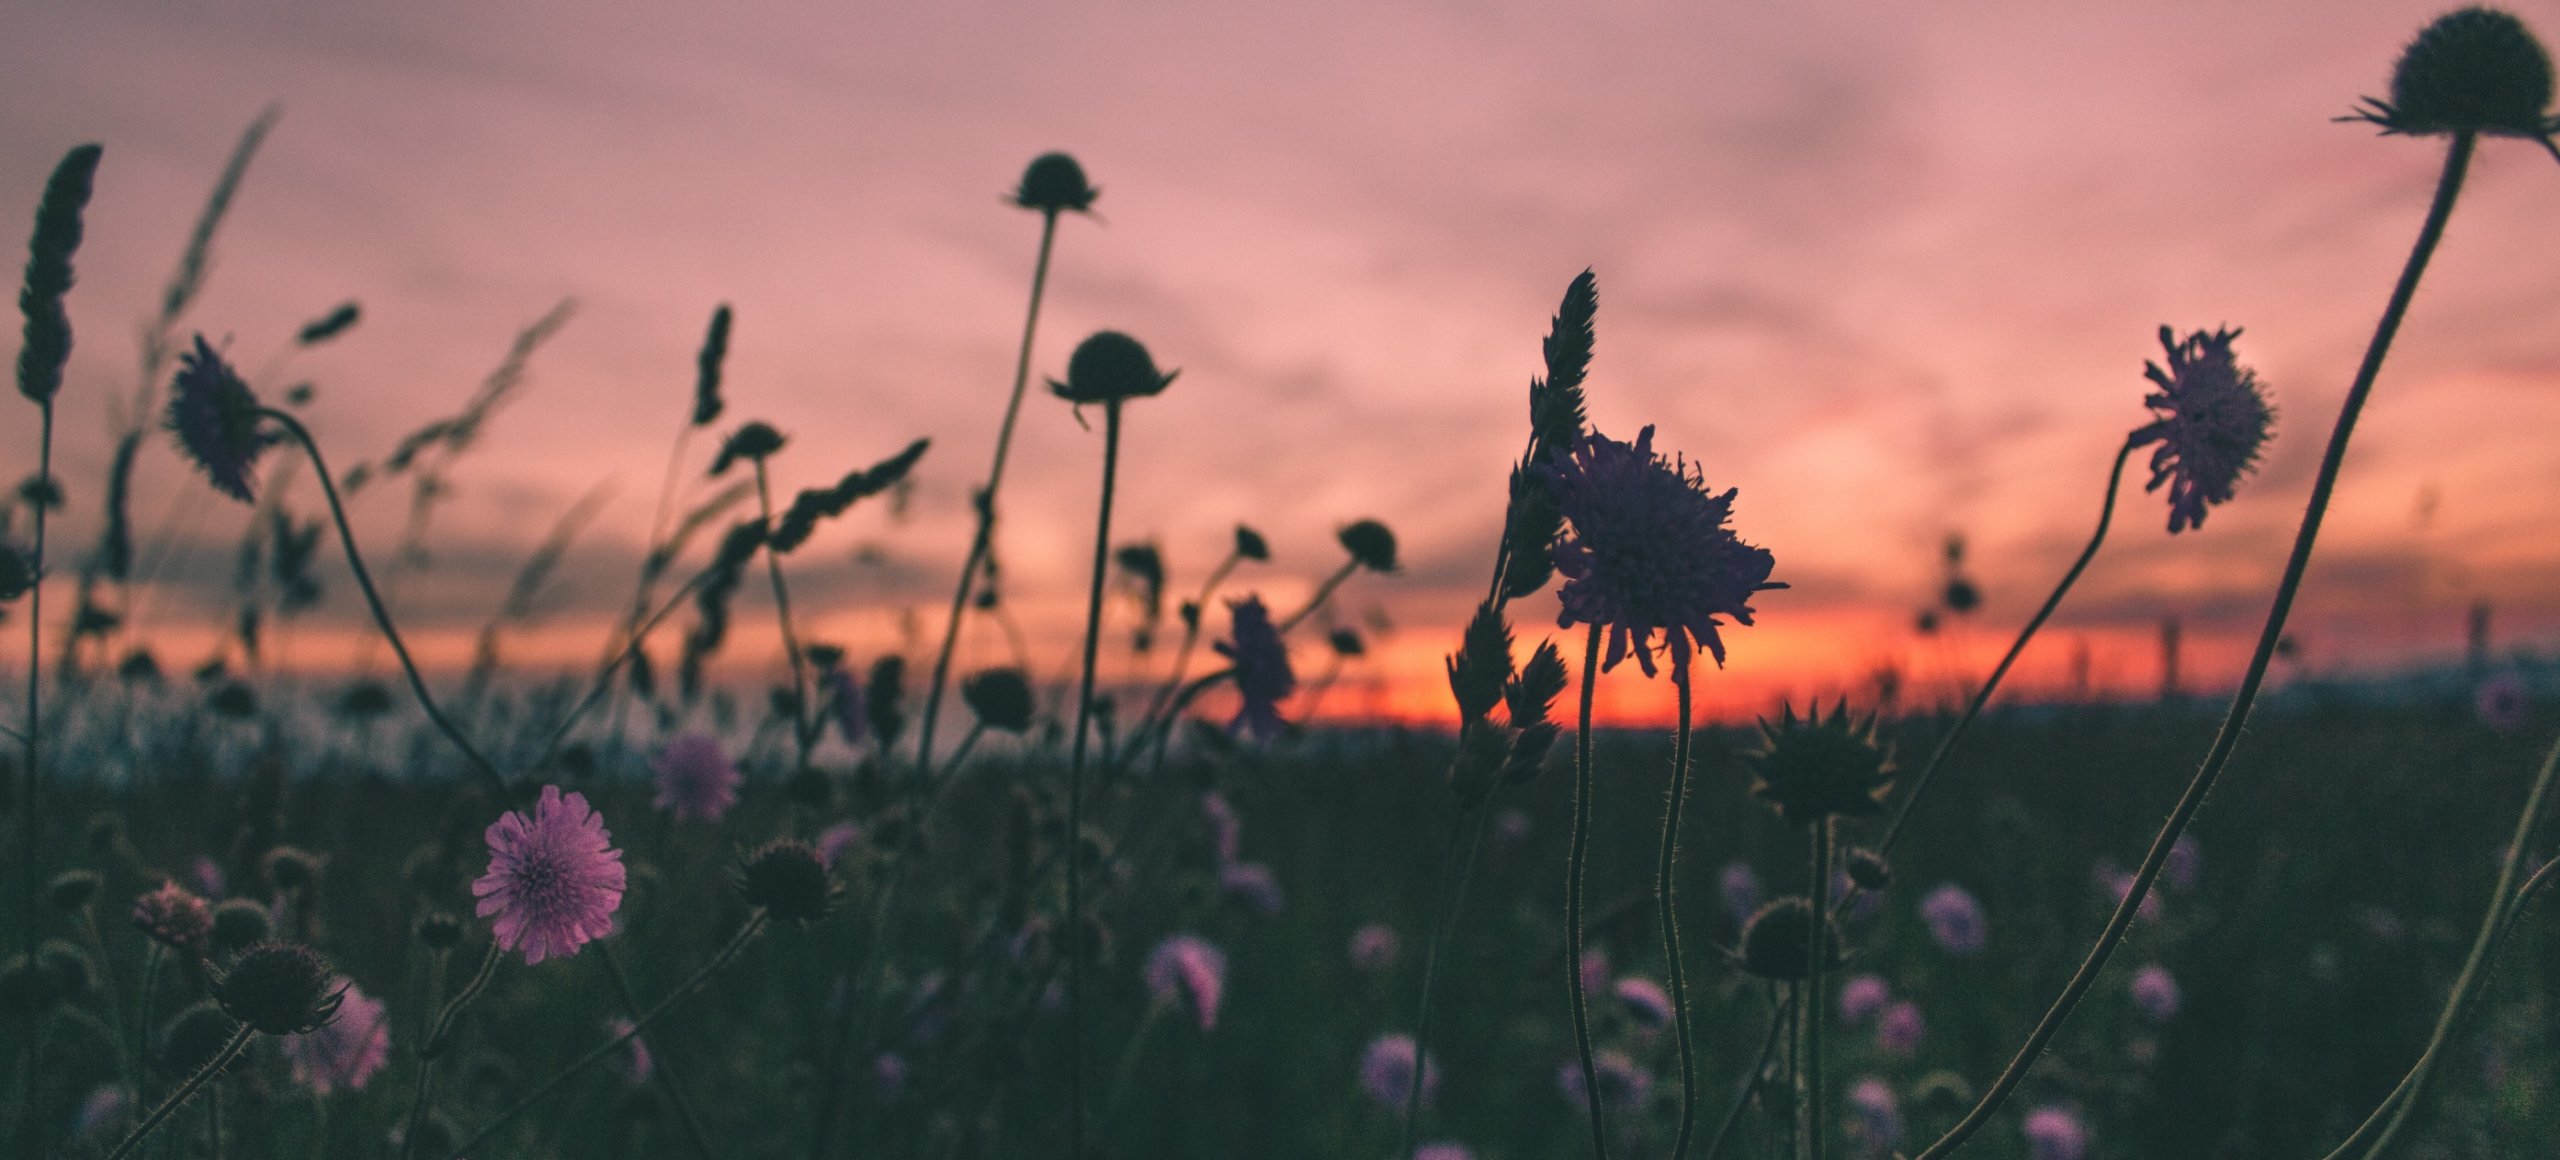 Wildflowers during a pink and purple sunset.